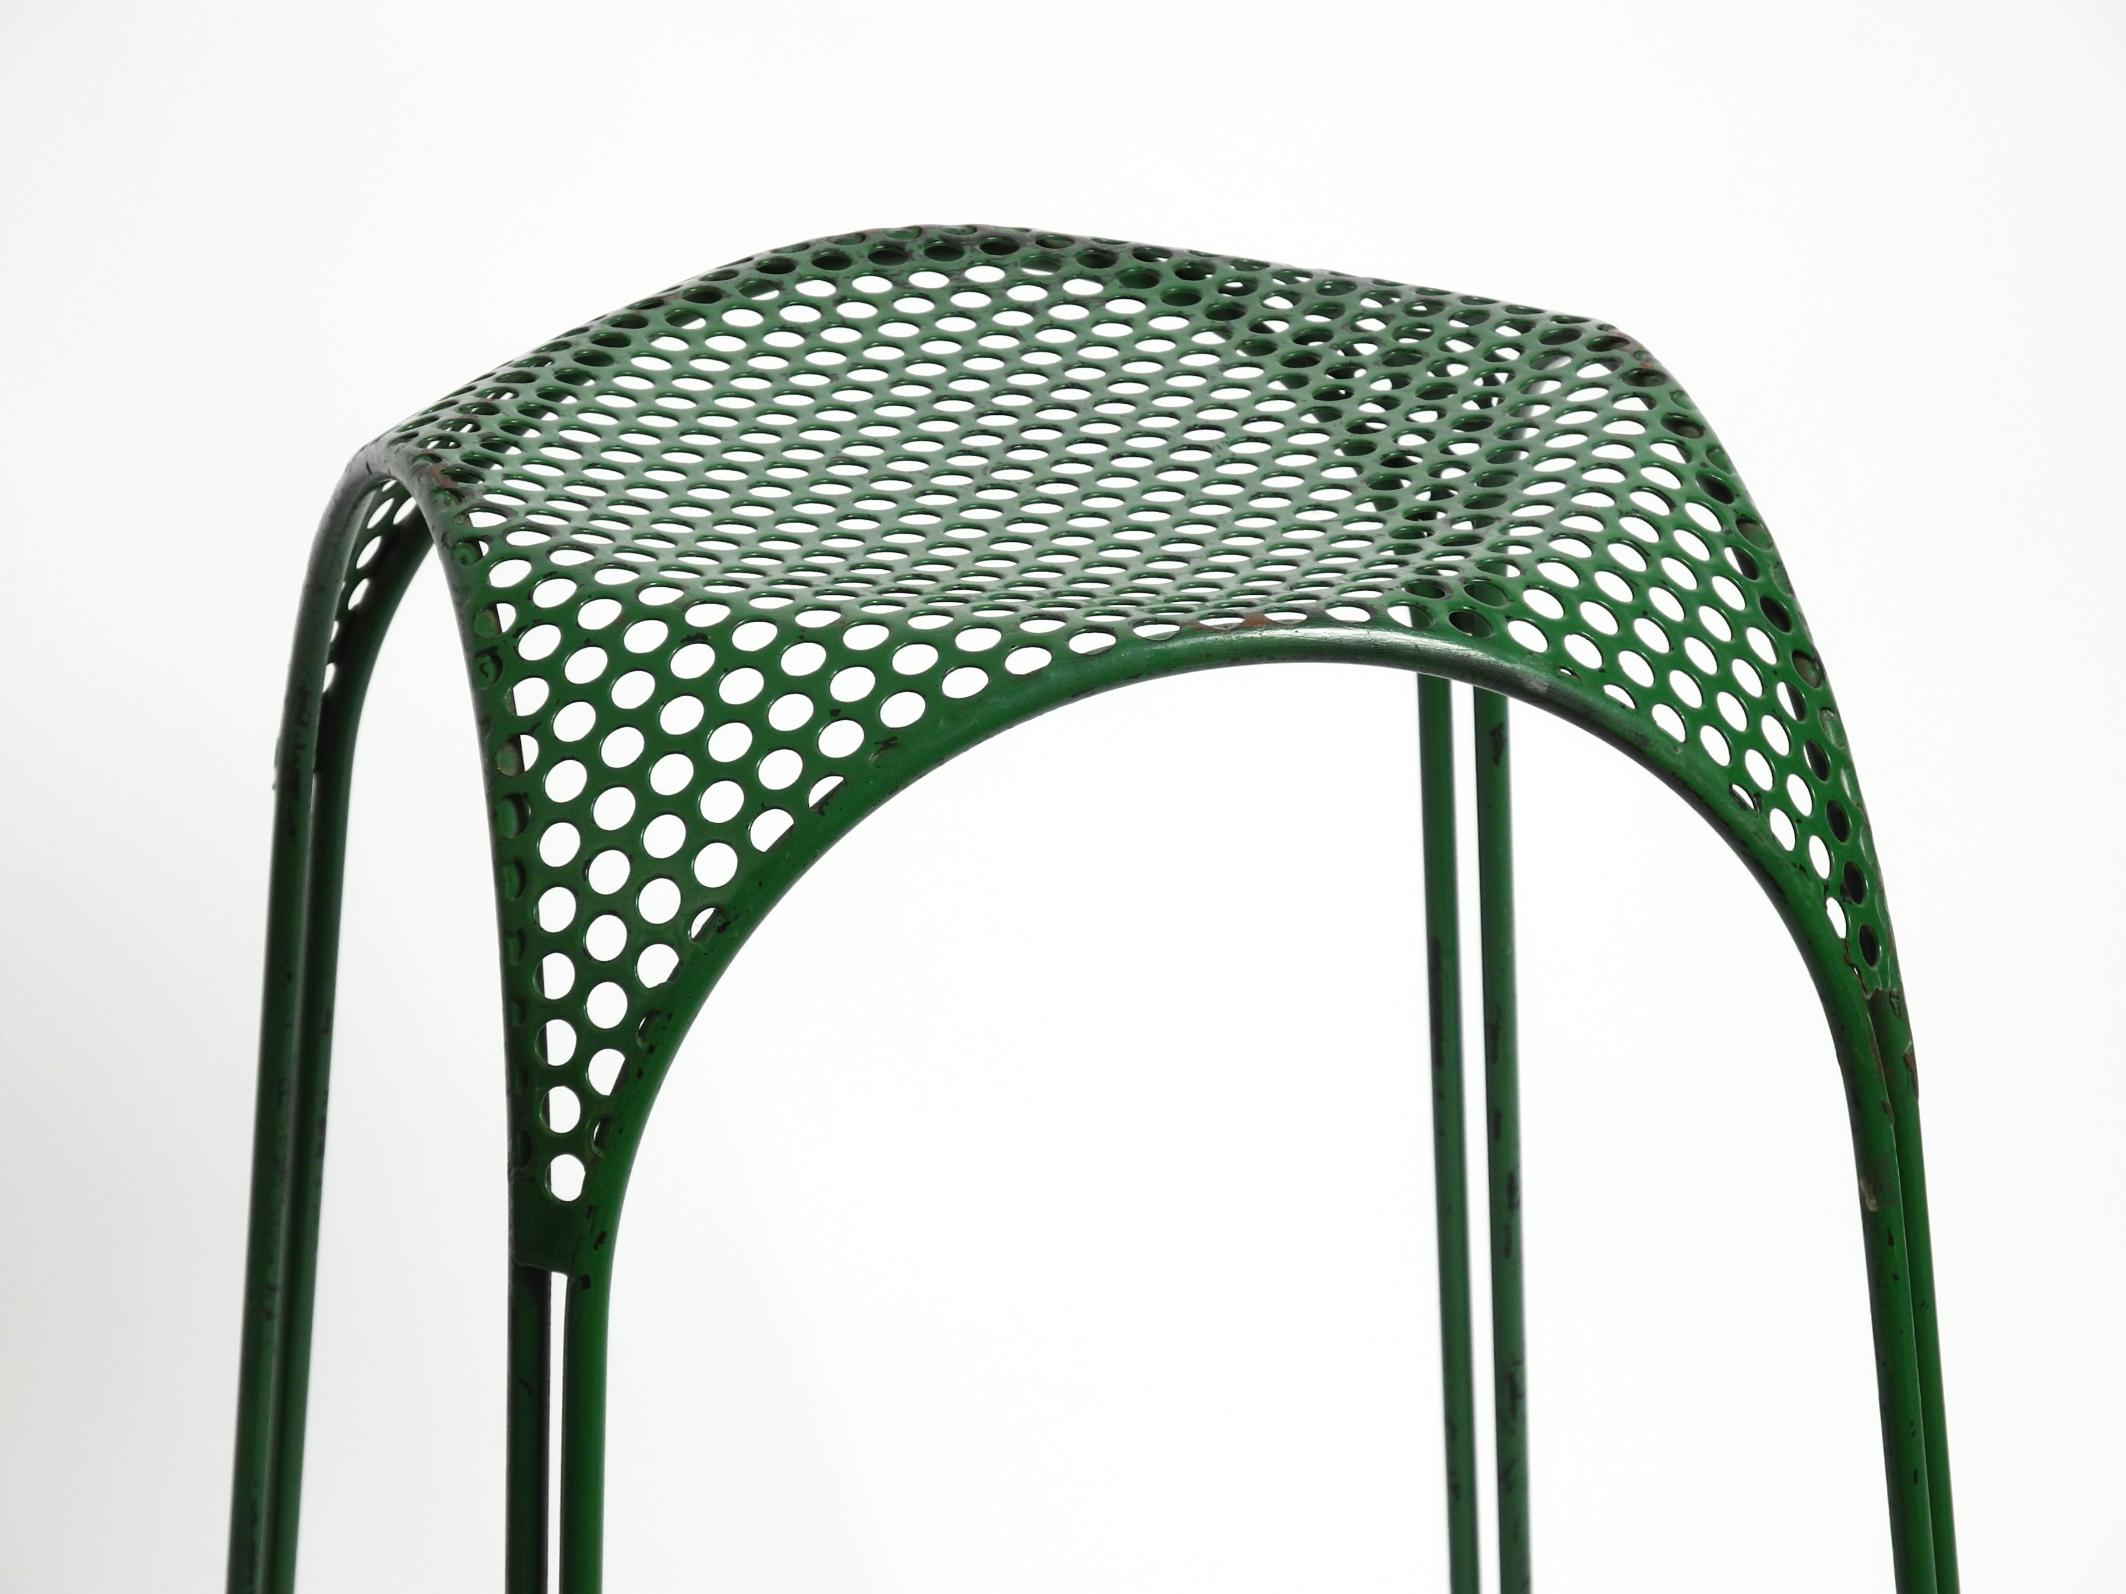 Italian 1960s bar stool made of green painted metal with perforated metal seat For Sale 7